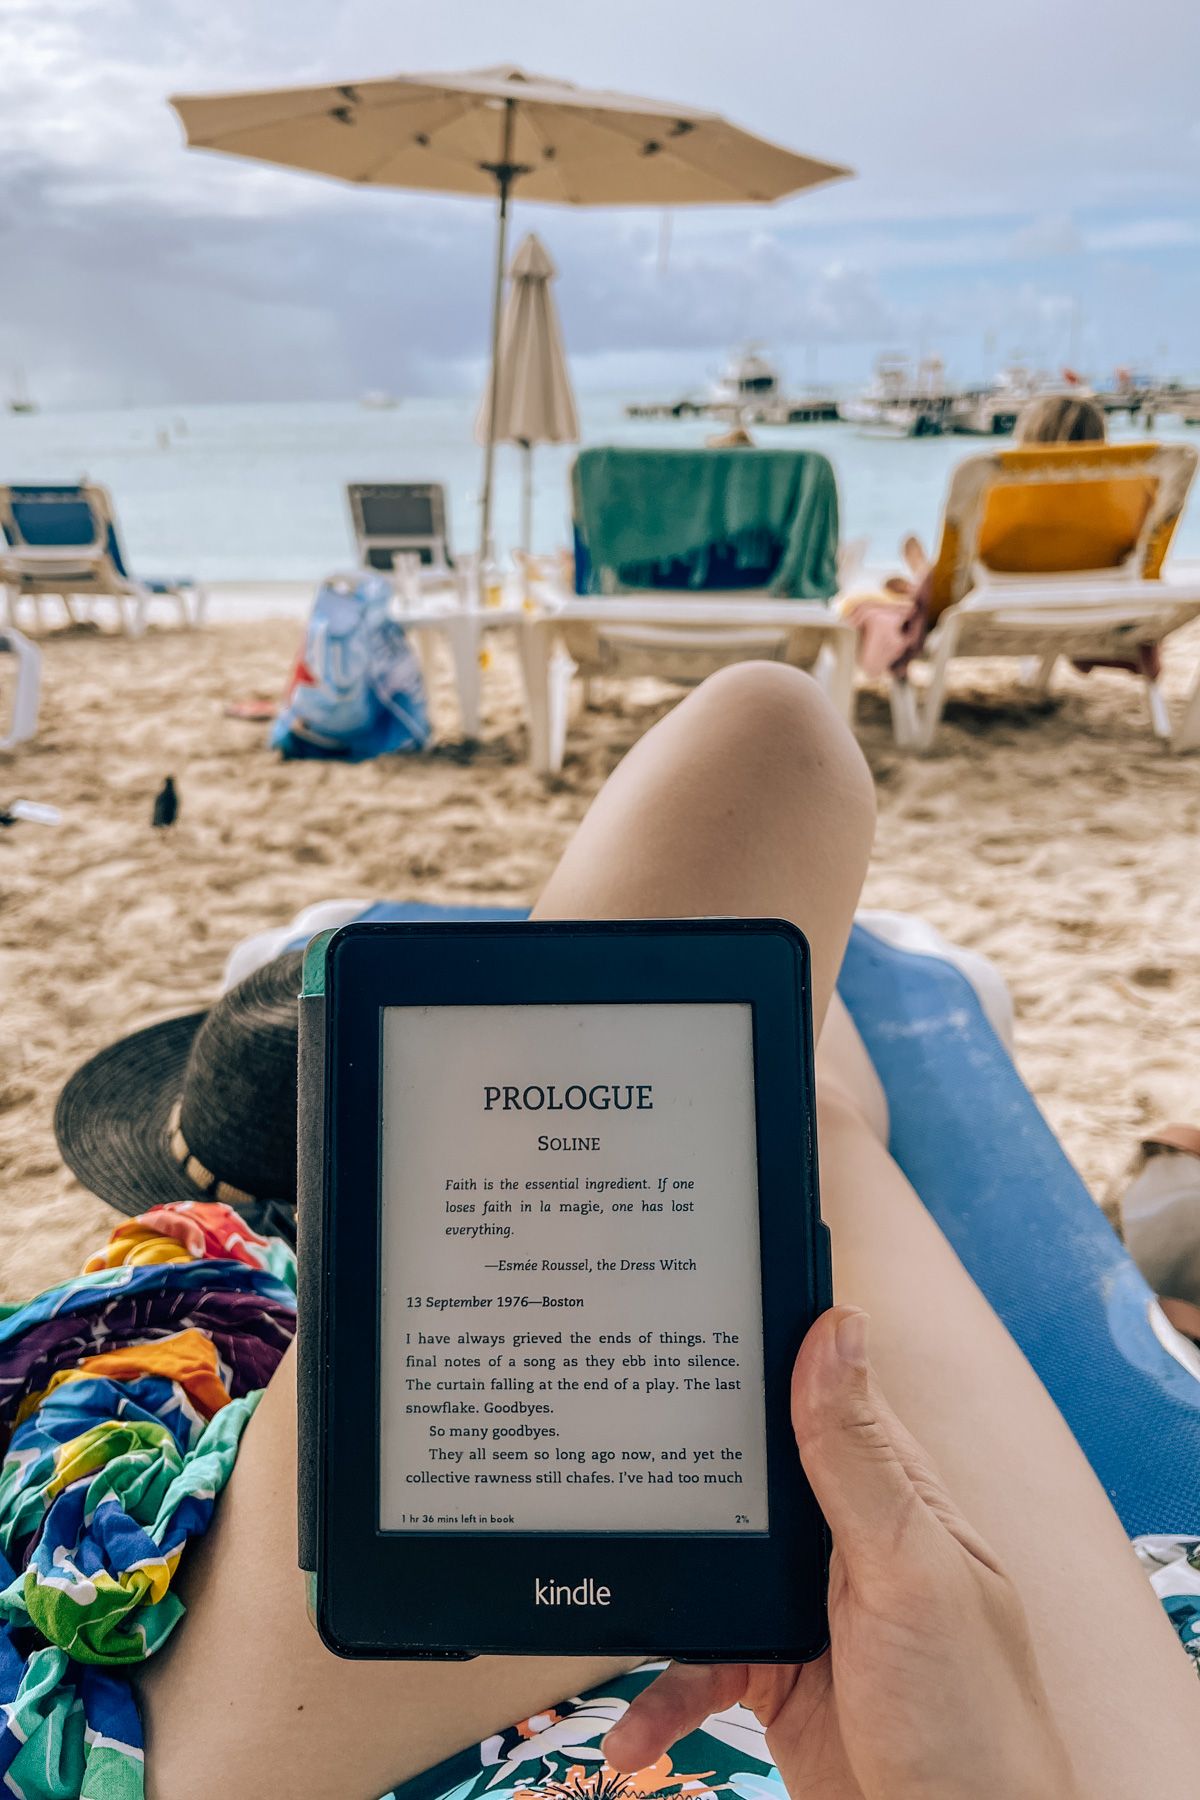 A POV shot of a hand holding a kindle displaying the first page of a book, a pair of legs lounging on a beach chair and a beach in soft-focus visible beyond.